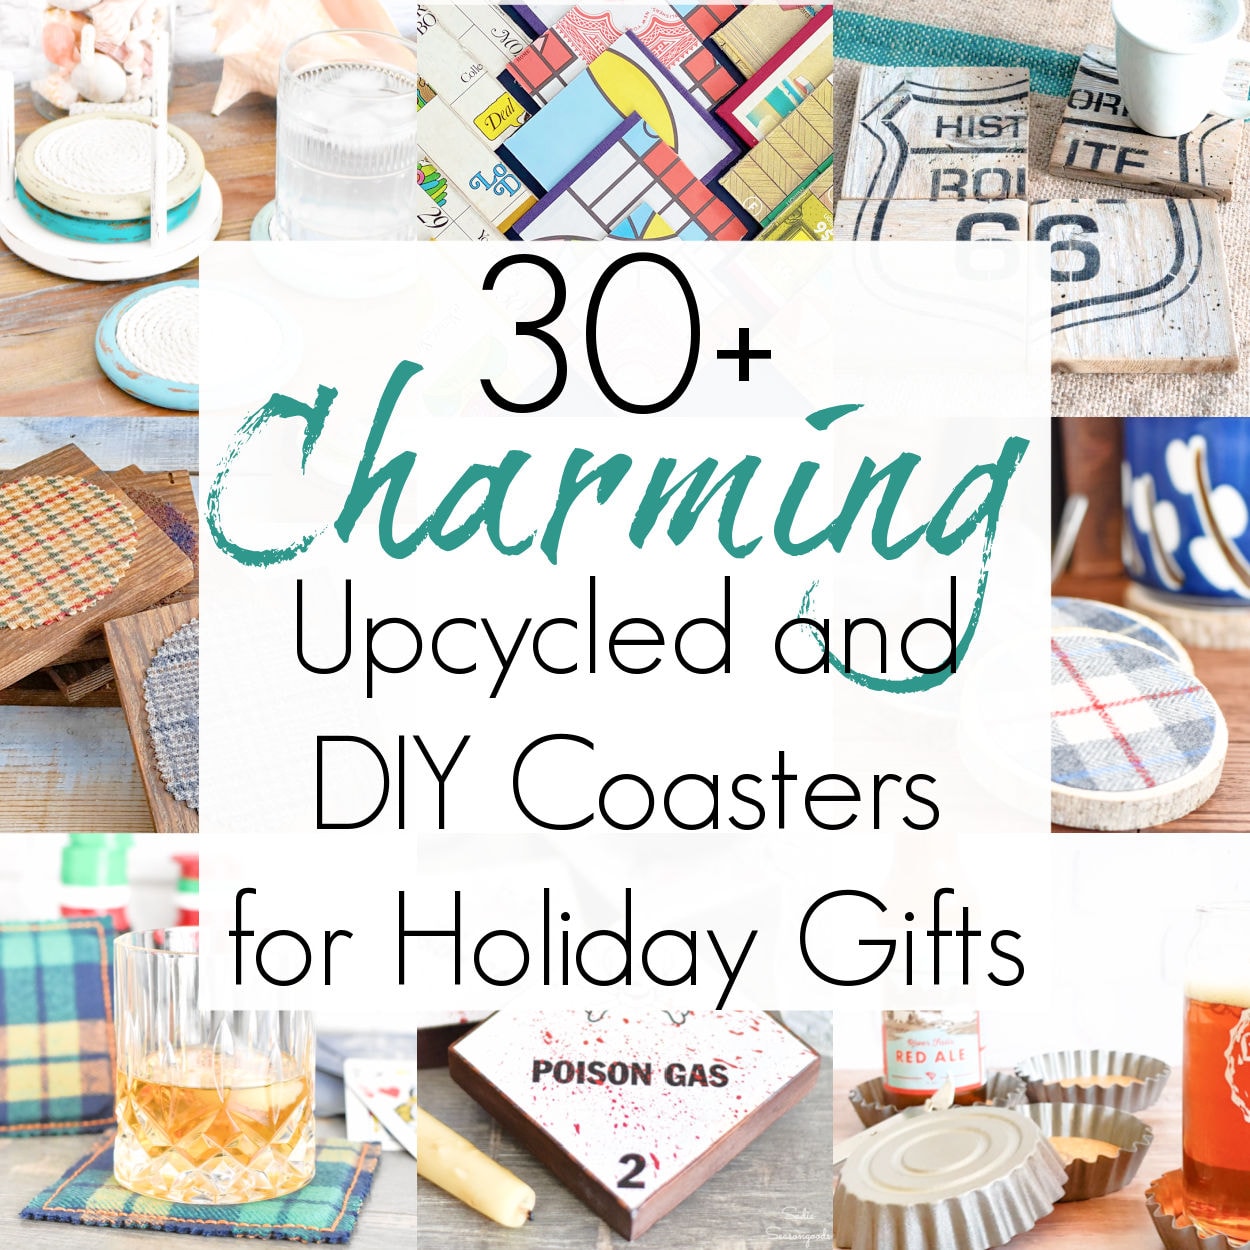 decorative coasters as upcycled gifts